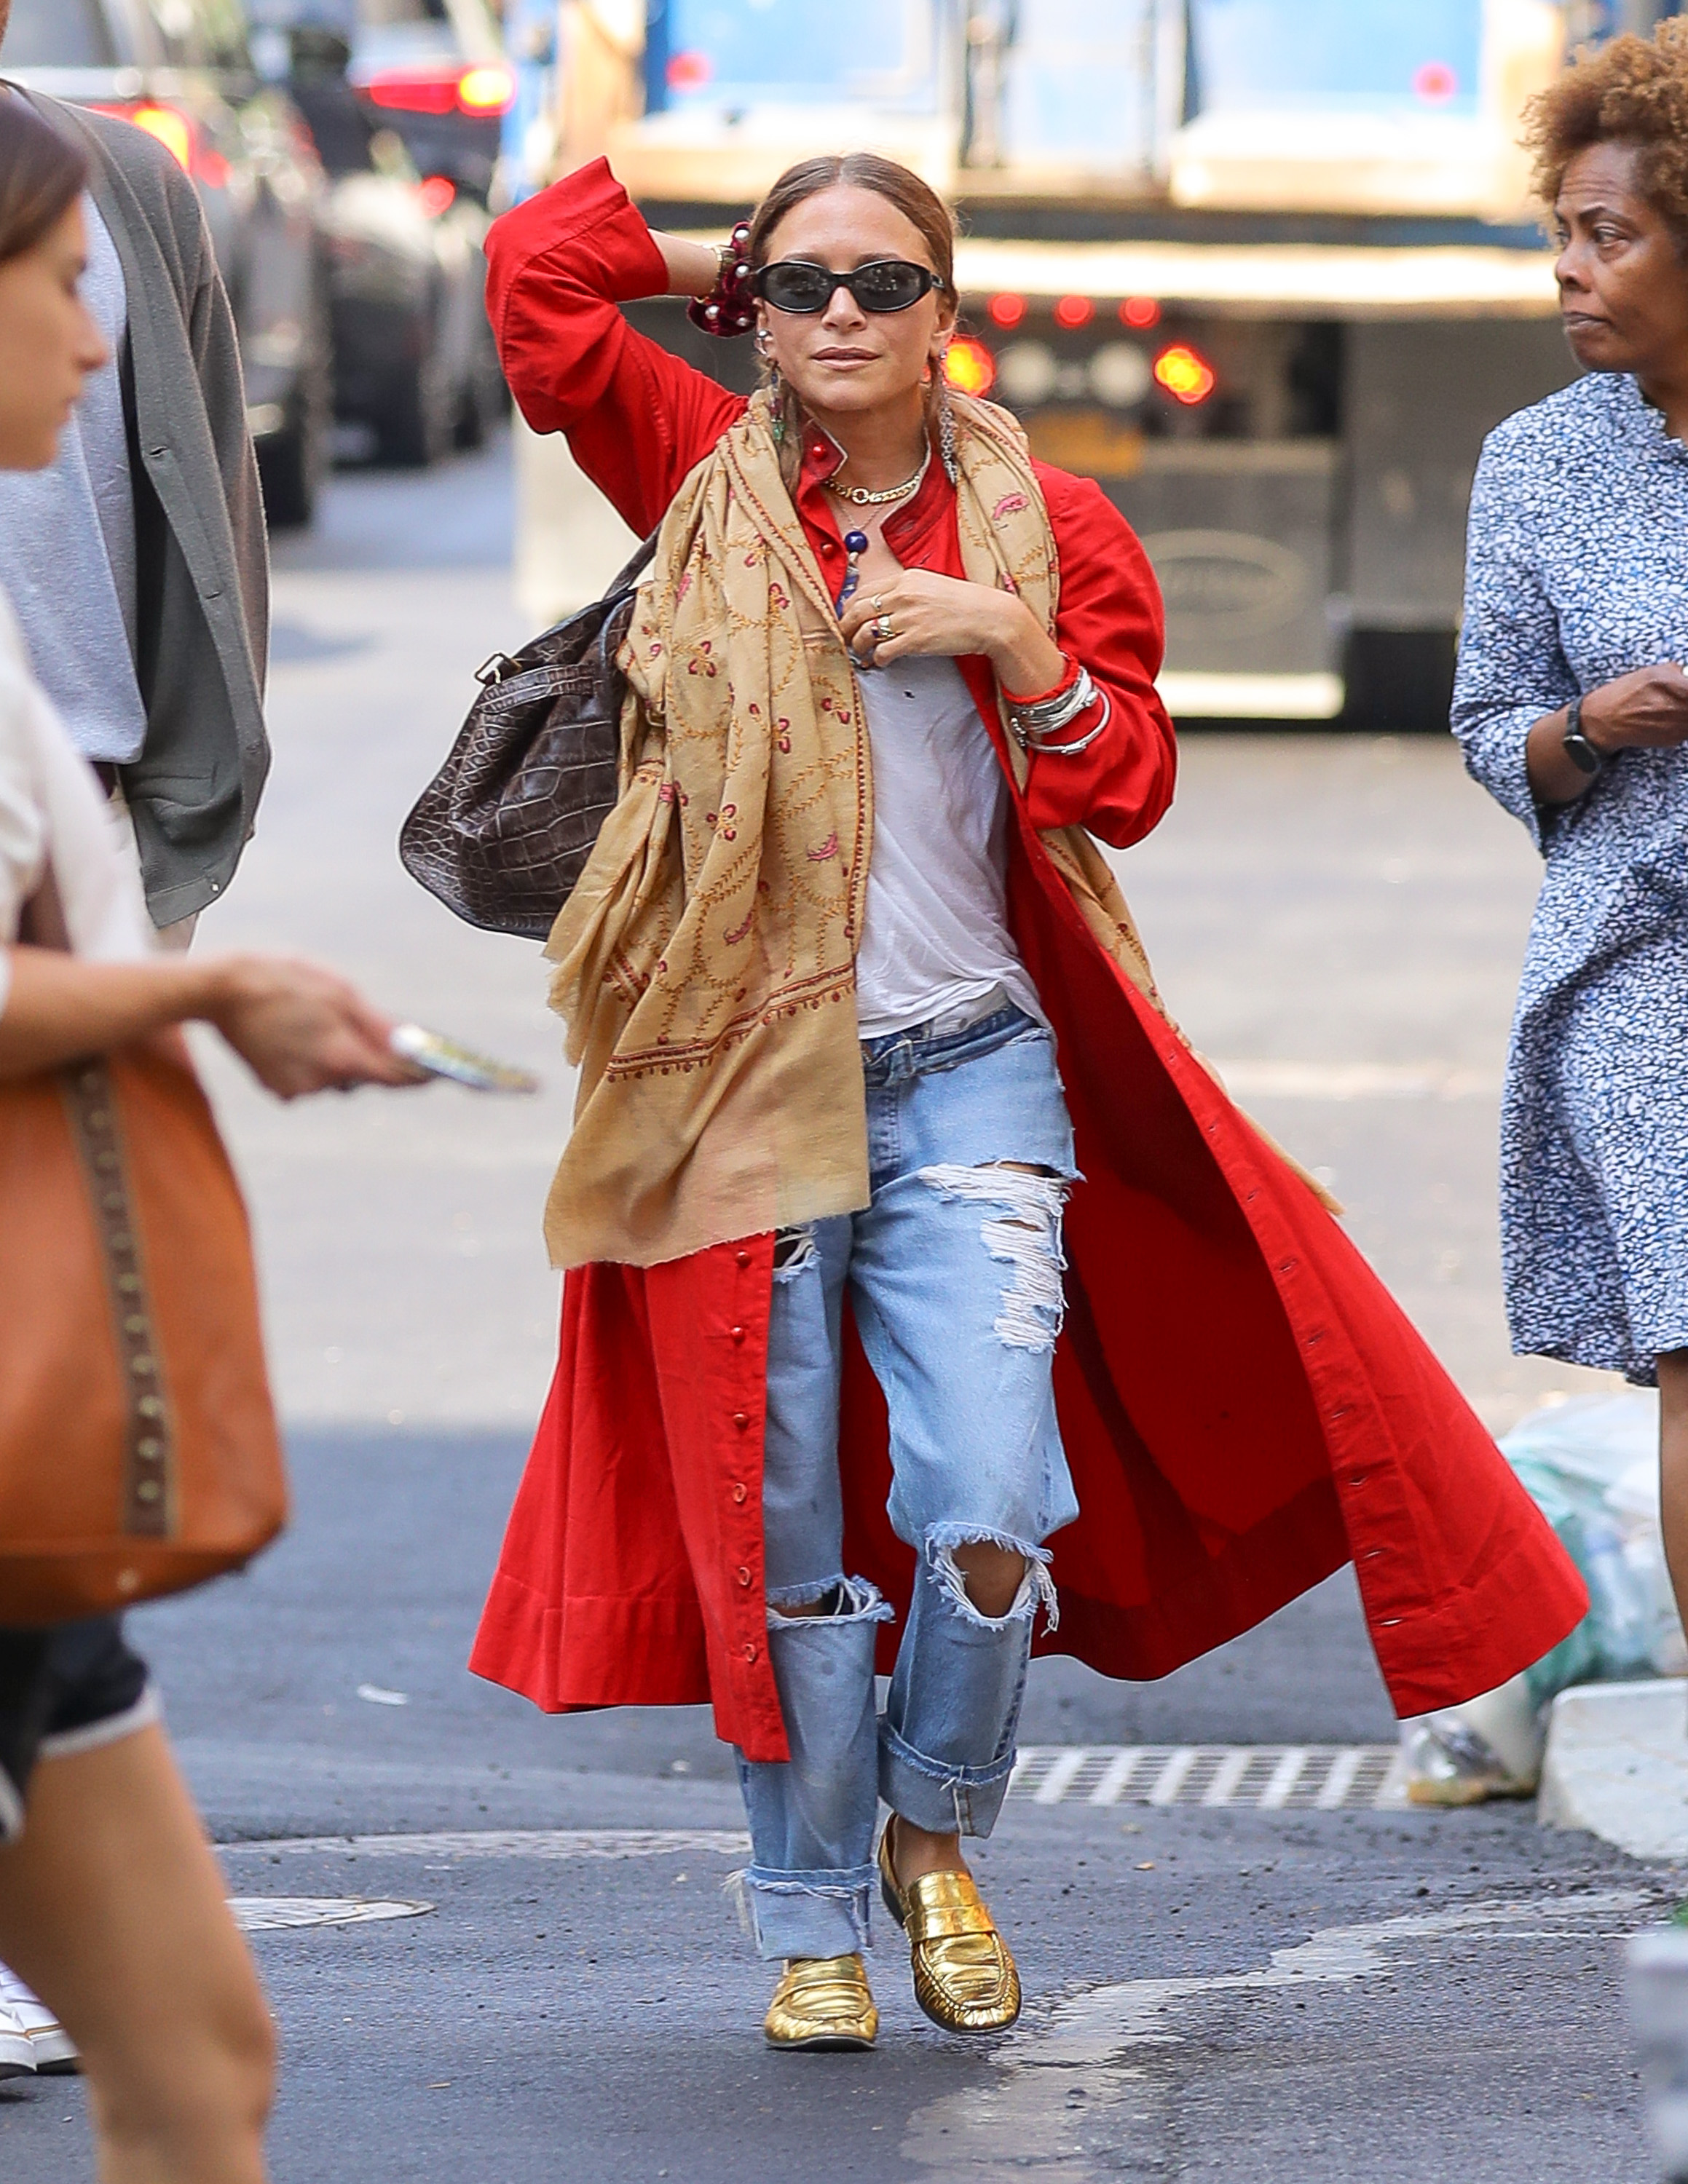 Mary-Kate wore ripped jeans with a red trench coat during her New York outing over the summer